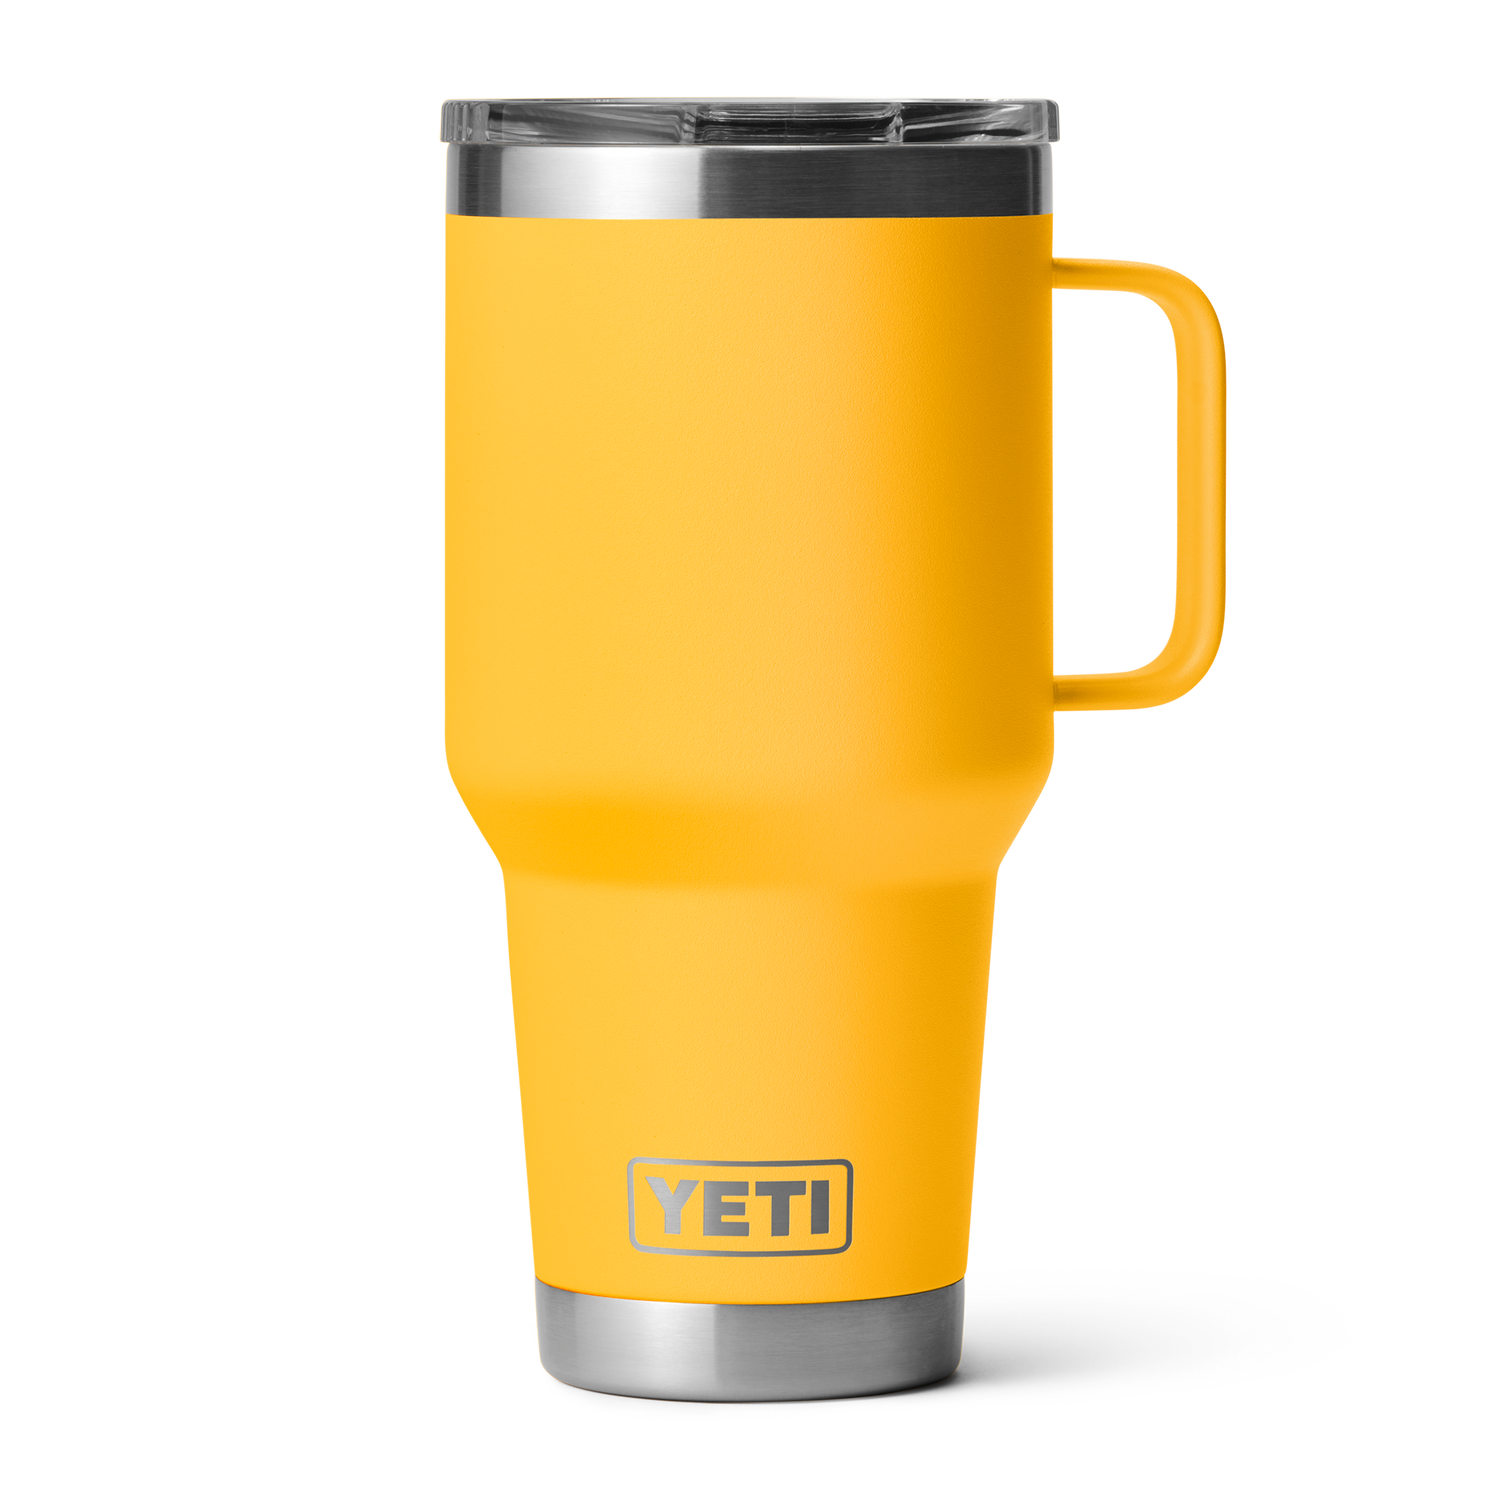  YETI Rambler 20 oz Travel Mug, Stainless Steel, Vacuum Insulated  with Stronghold Lid, Coral: Home & Kitchen